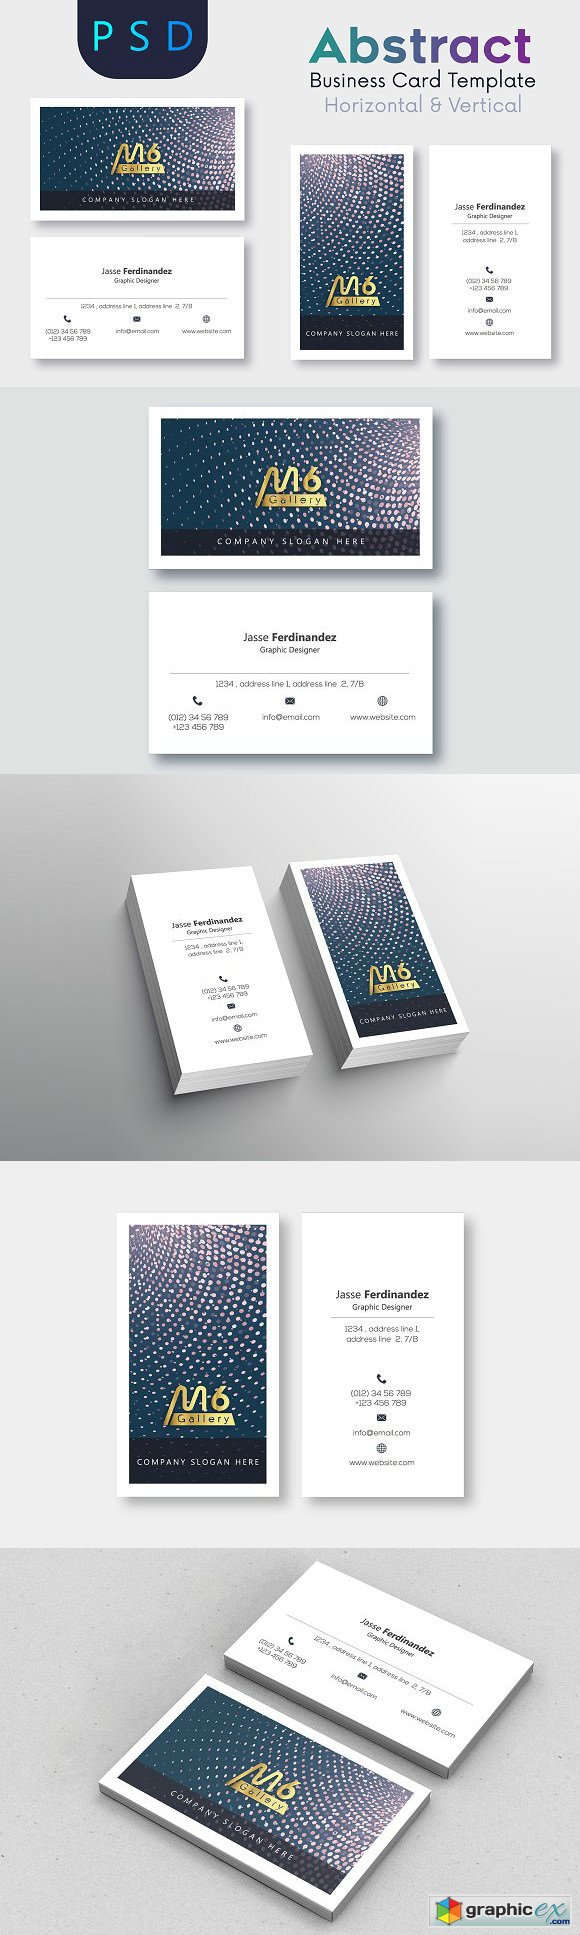 Abstract Business Card Template- S09